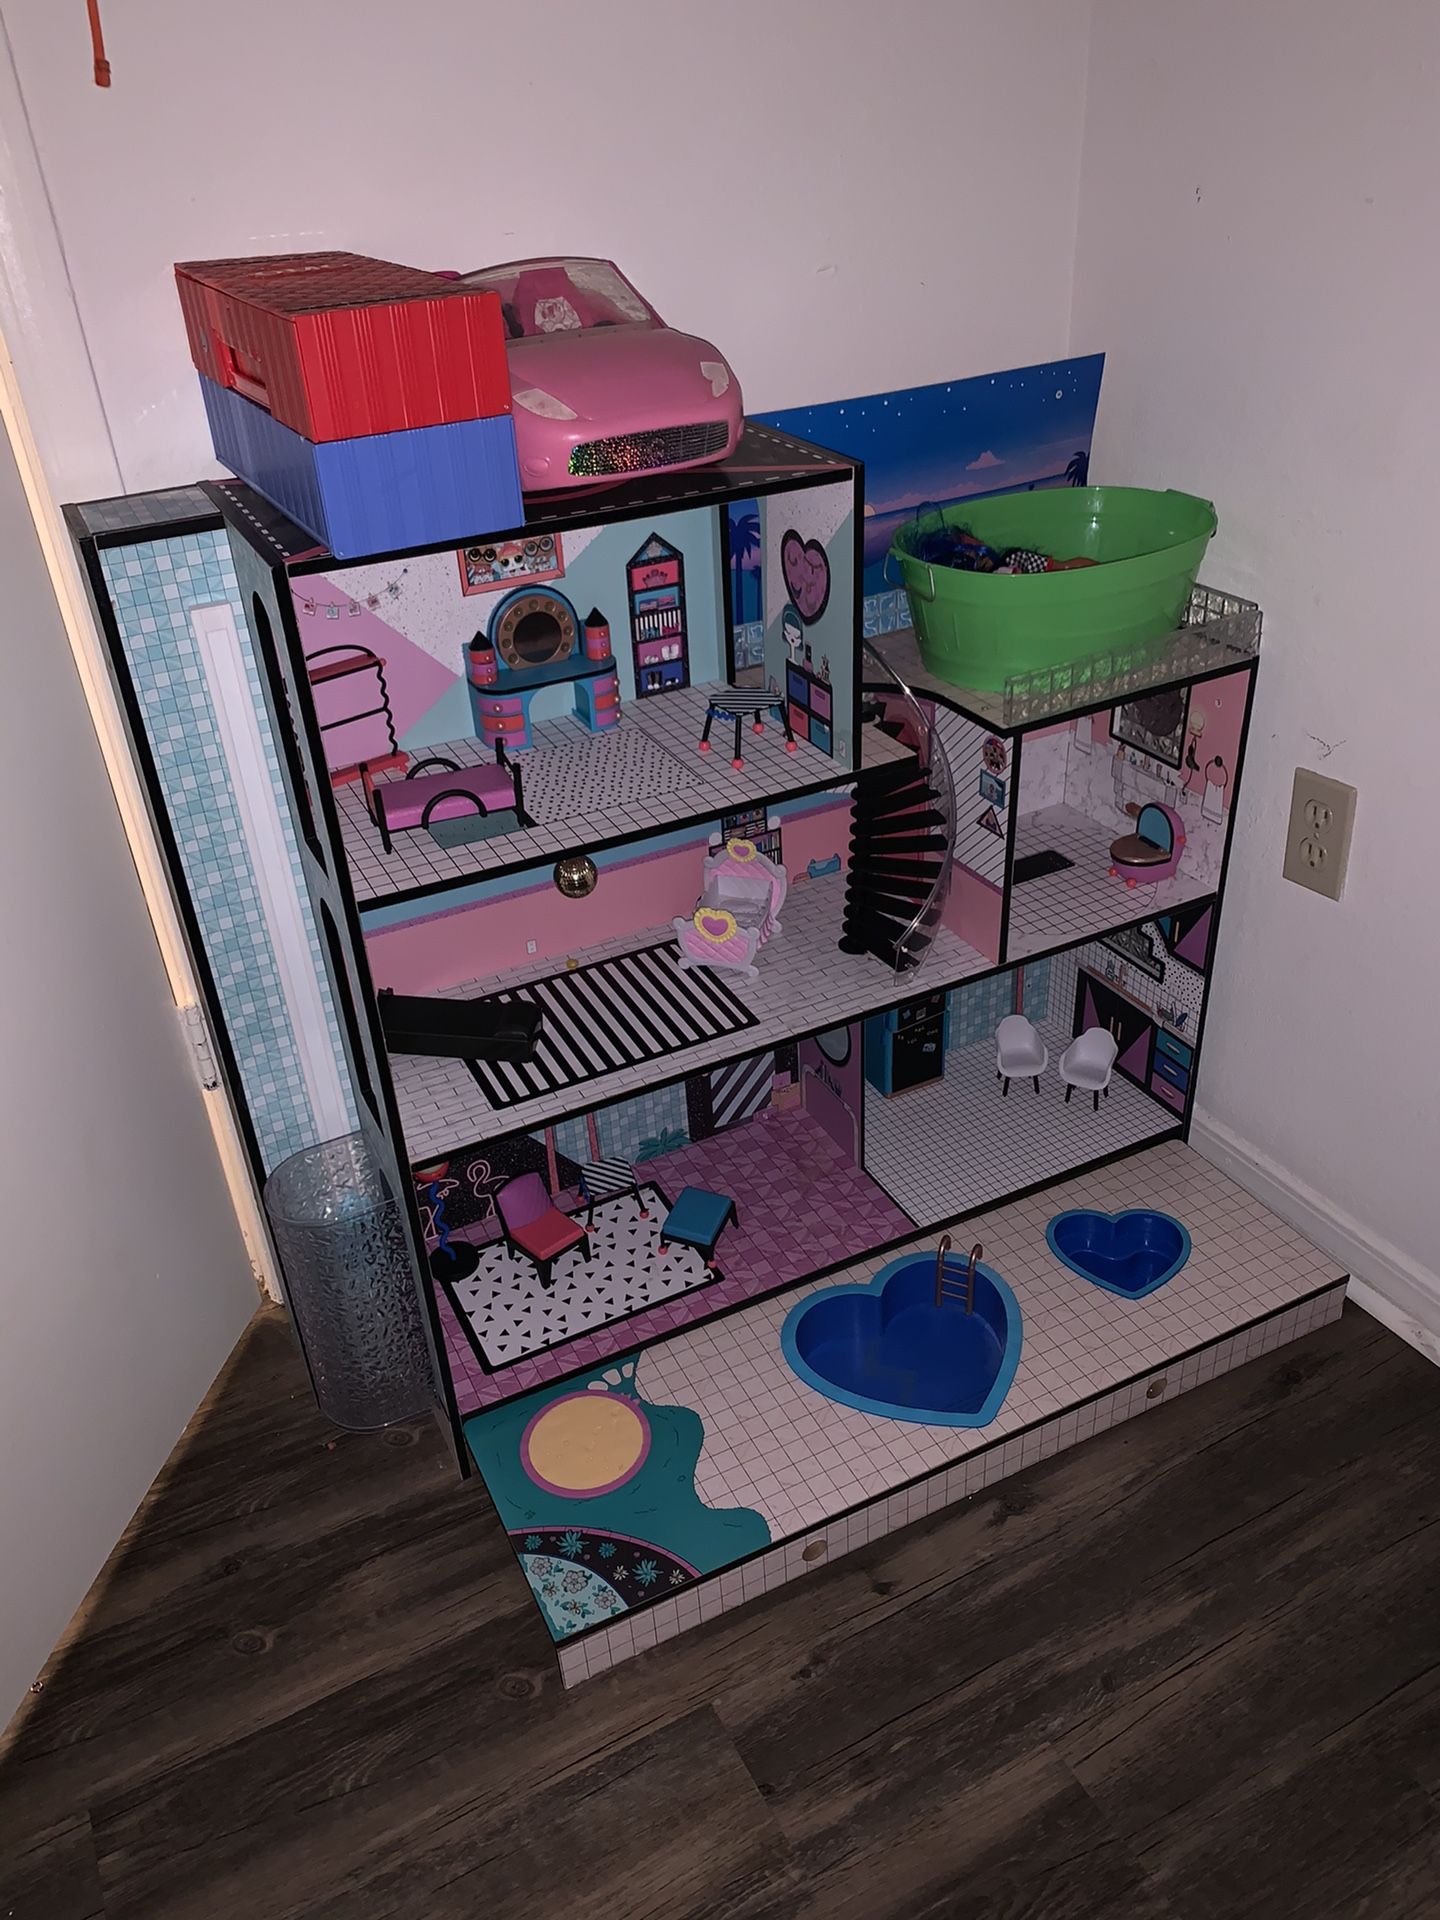 LOL doll house with dolls and all accessories pictured